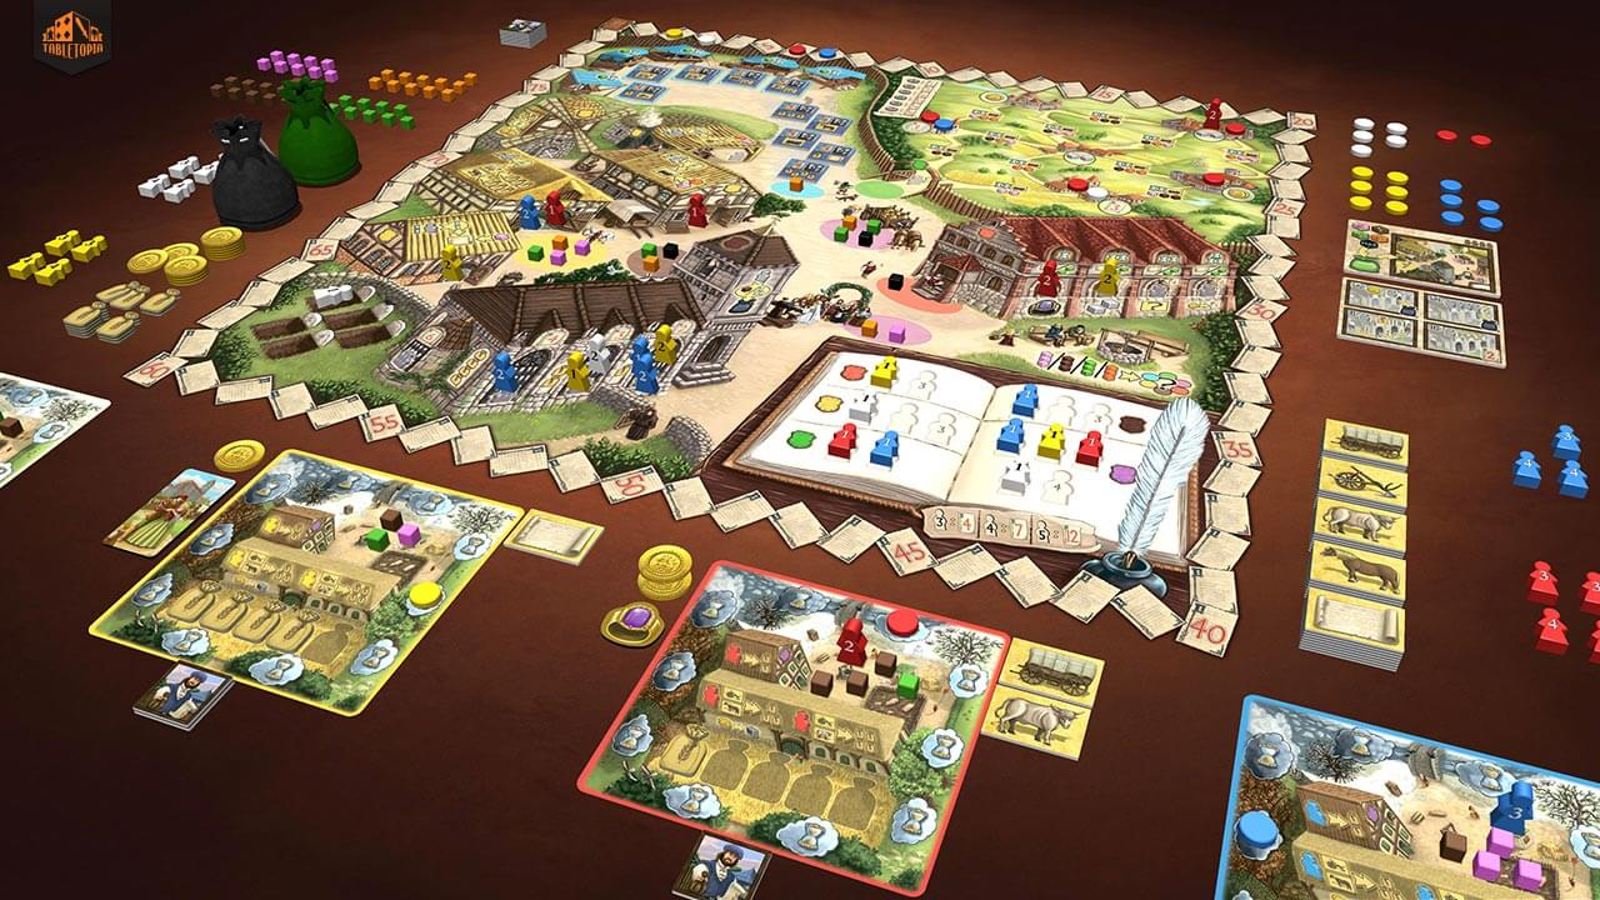 Play Board Kings: Board Dice Games Online for Free on PC & Mobile